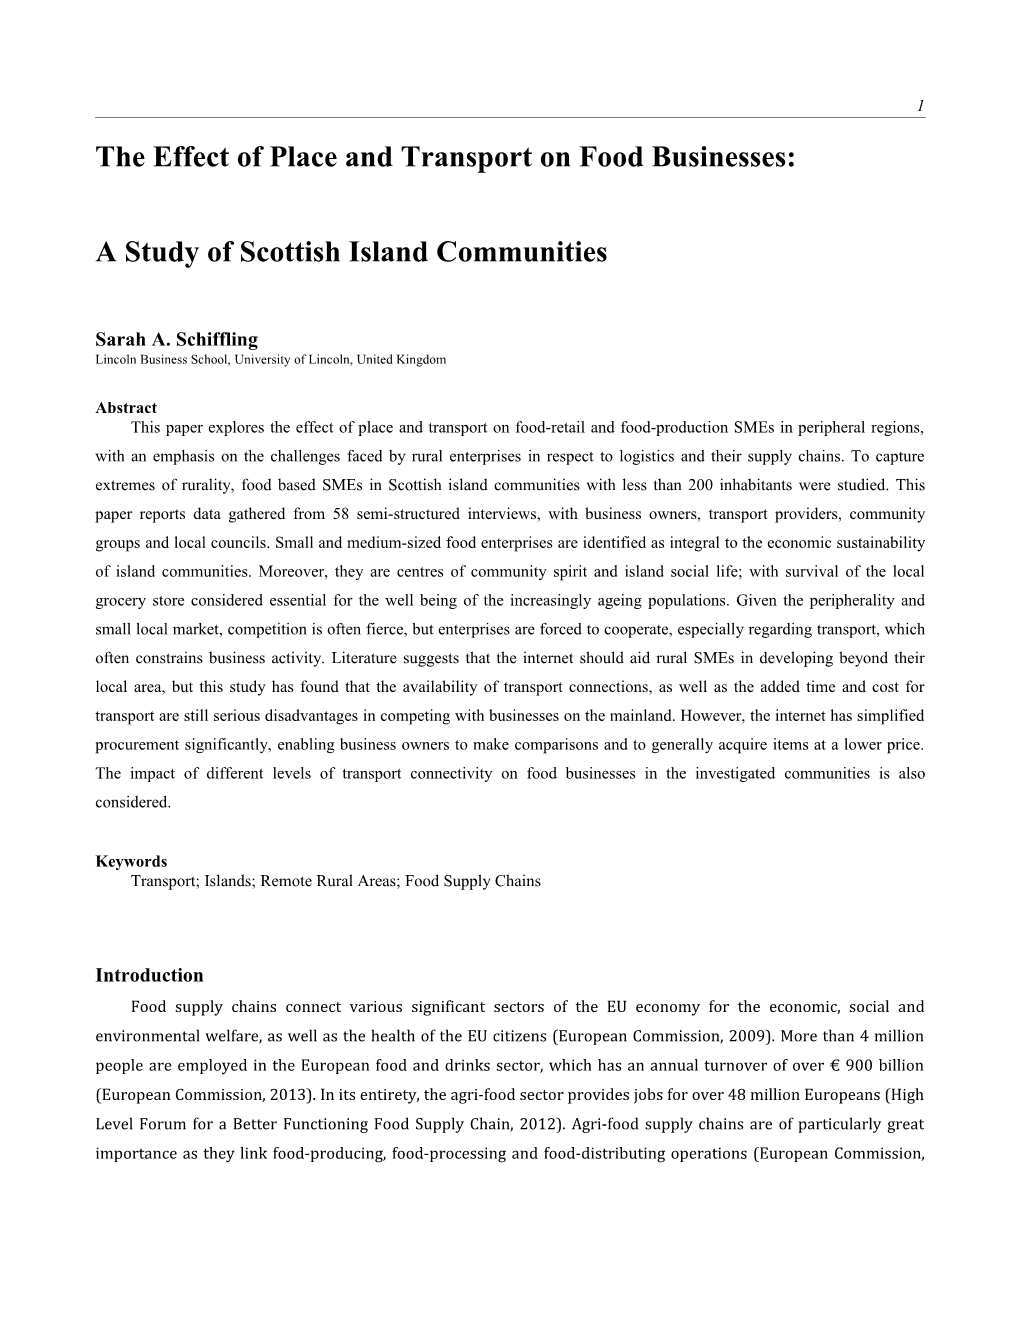 The Effect of Place and Transport on Food Businesses